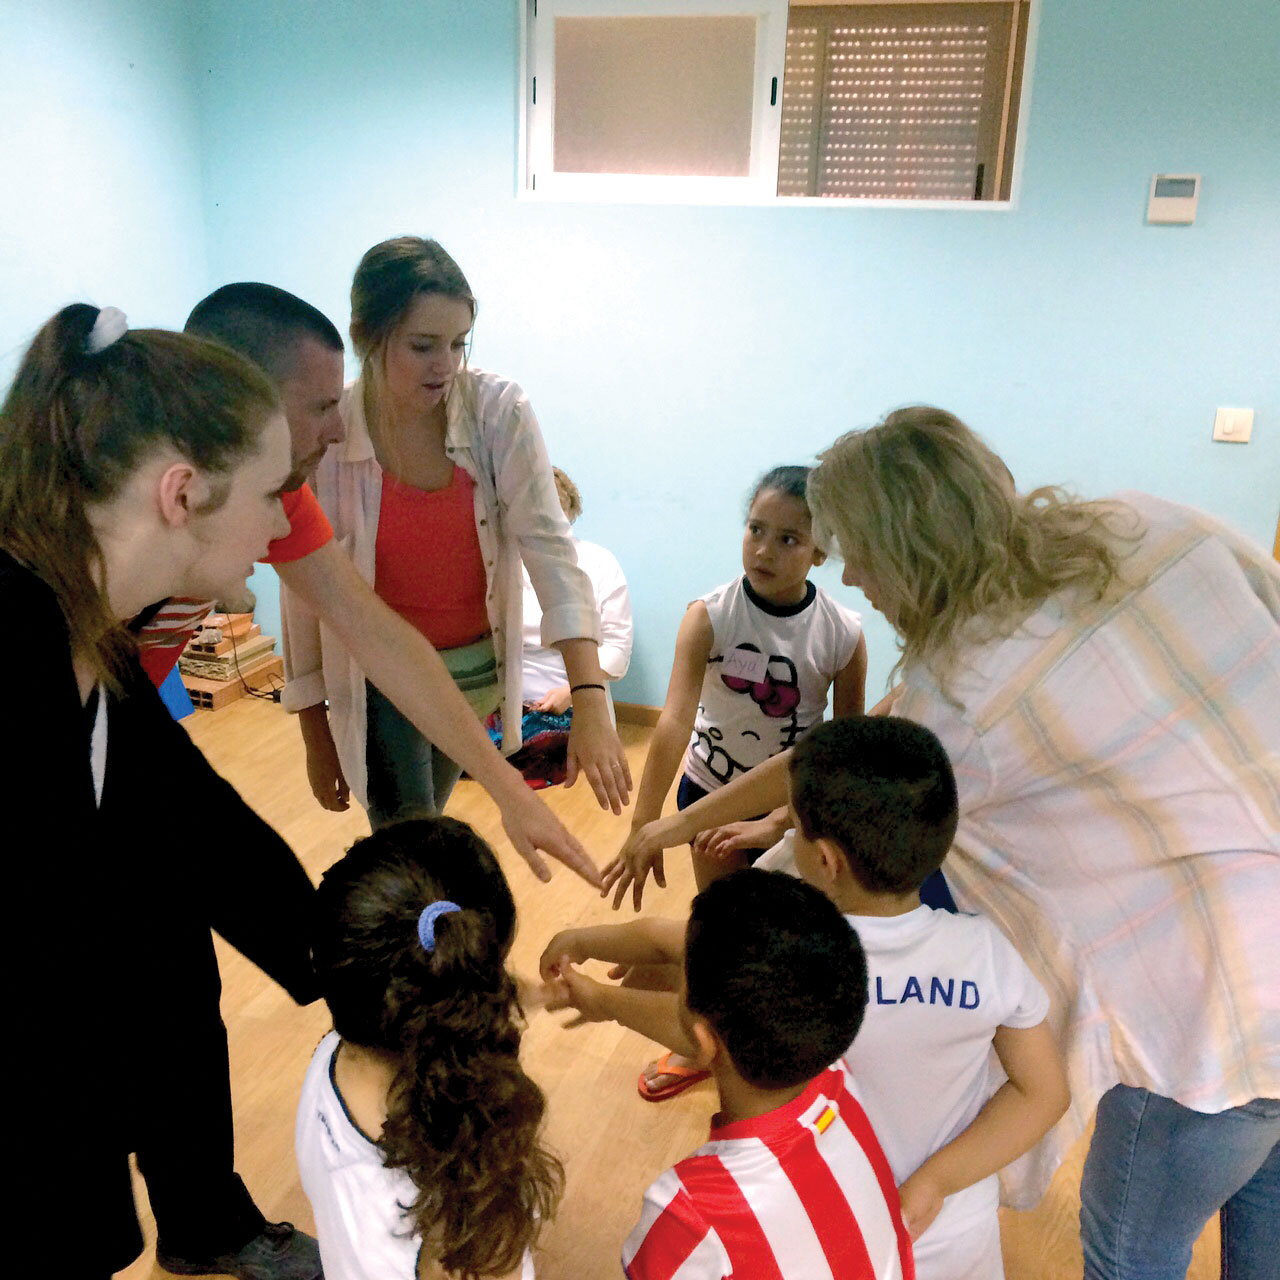 Members of Madrid team teach children a rally cheer at English Camp. (Photo: Provided)